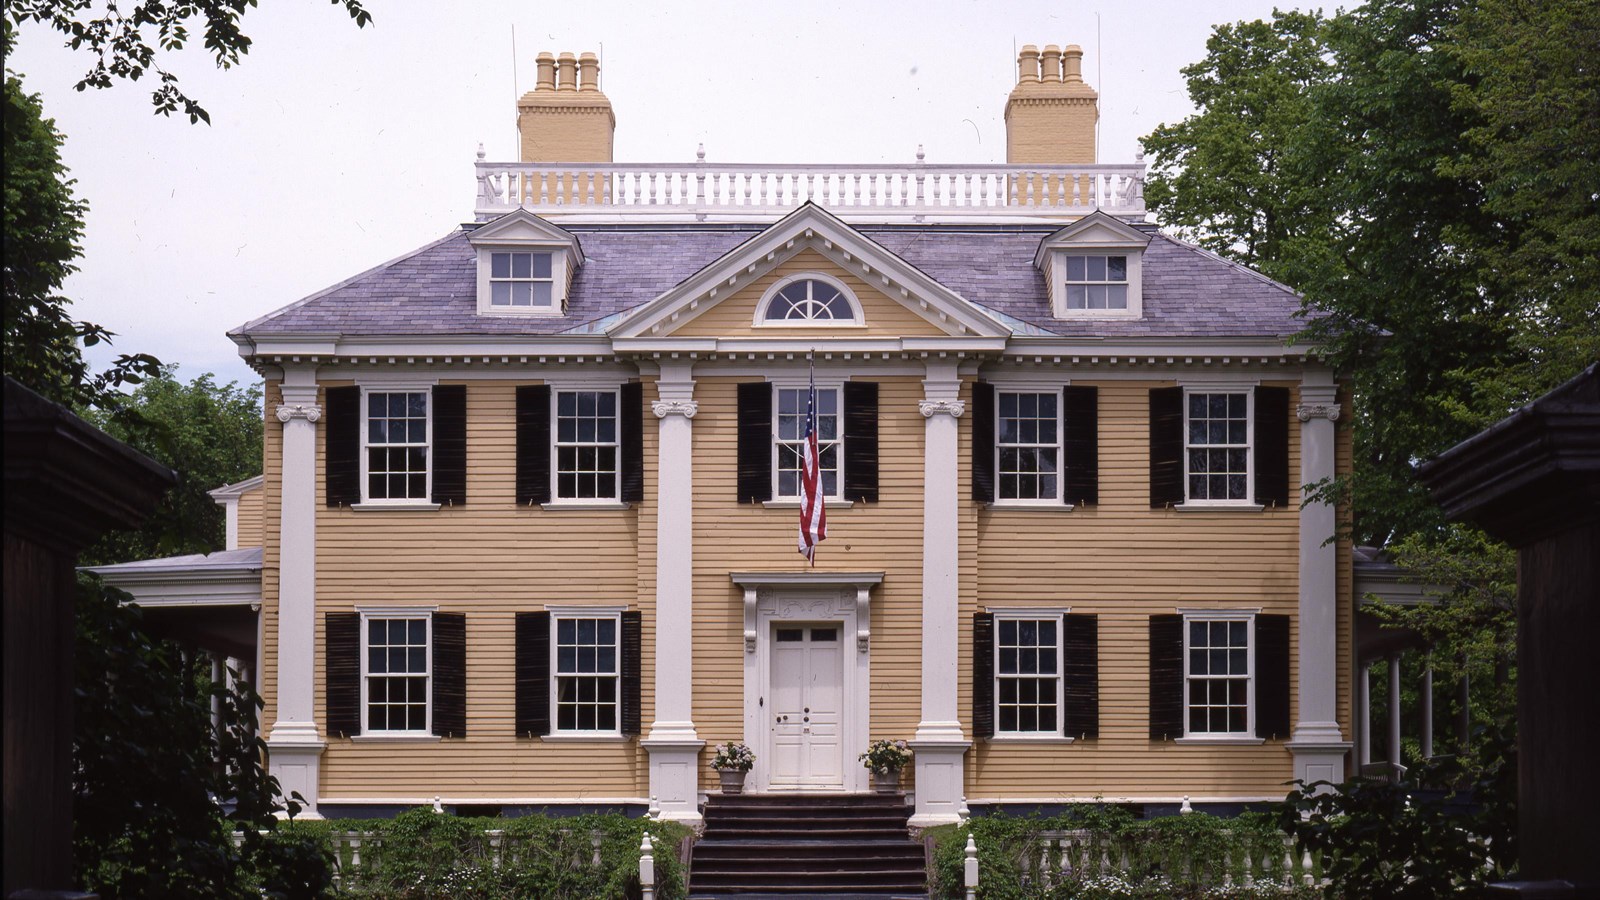 Large three-story yellow house with symmetrical facade, 12 windows, and two chimneys